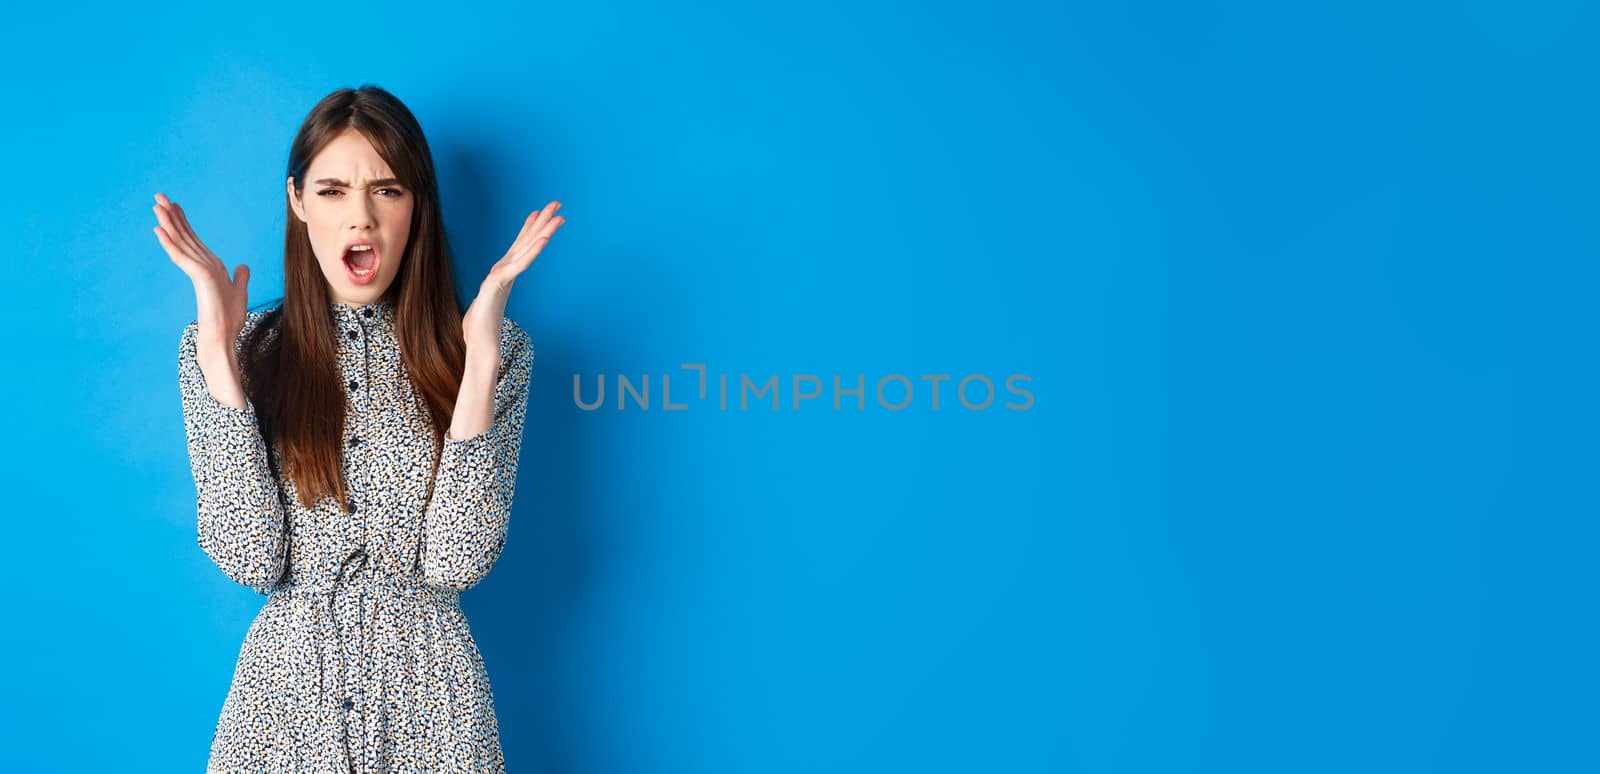 Frustrated and angry woman in dress, scream and frown at camera, raising hands up outraged, having an argument, standing on blue background by Benzoix